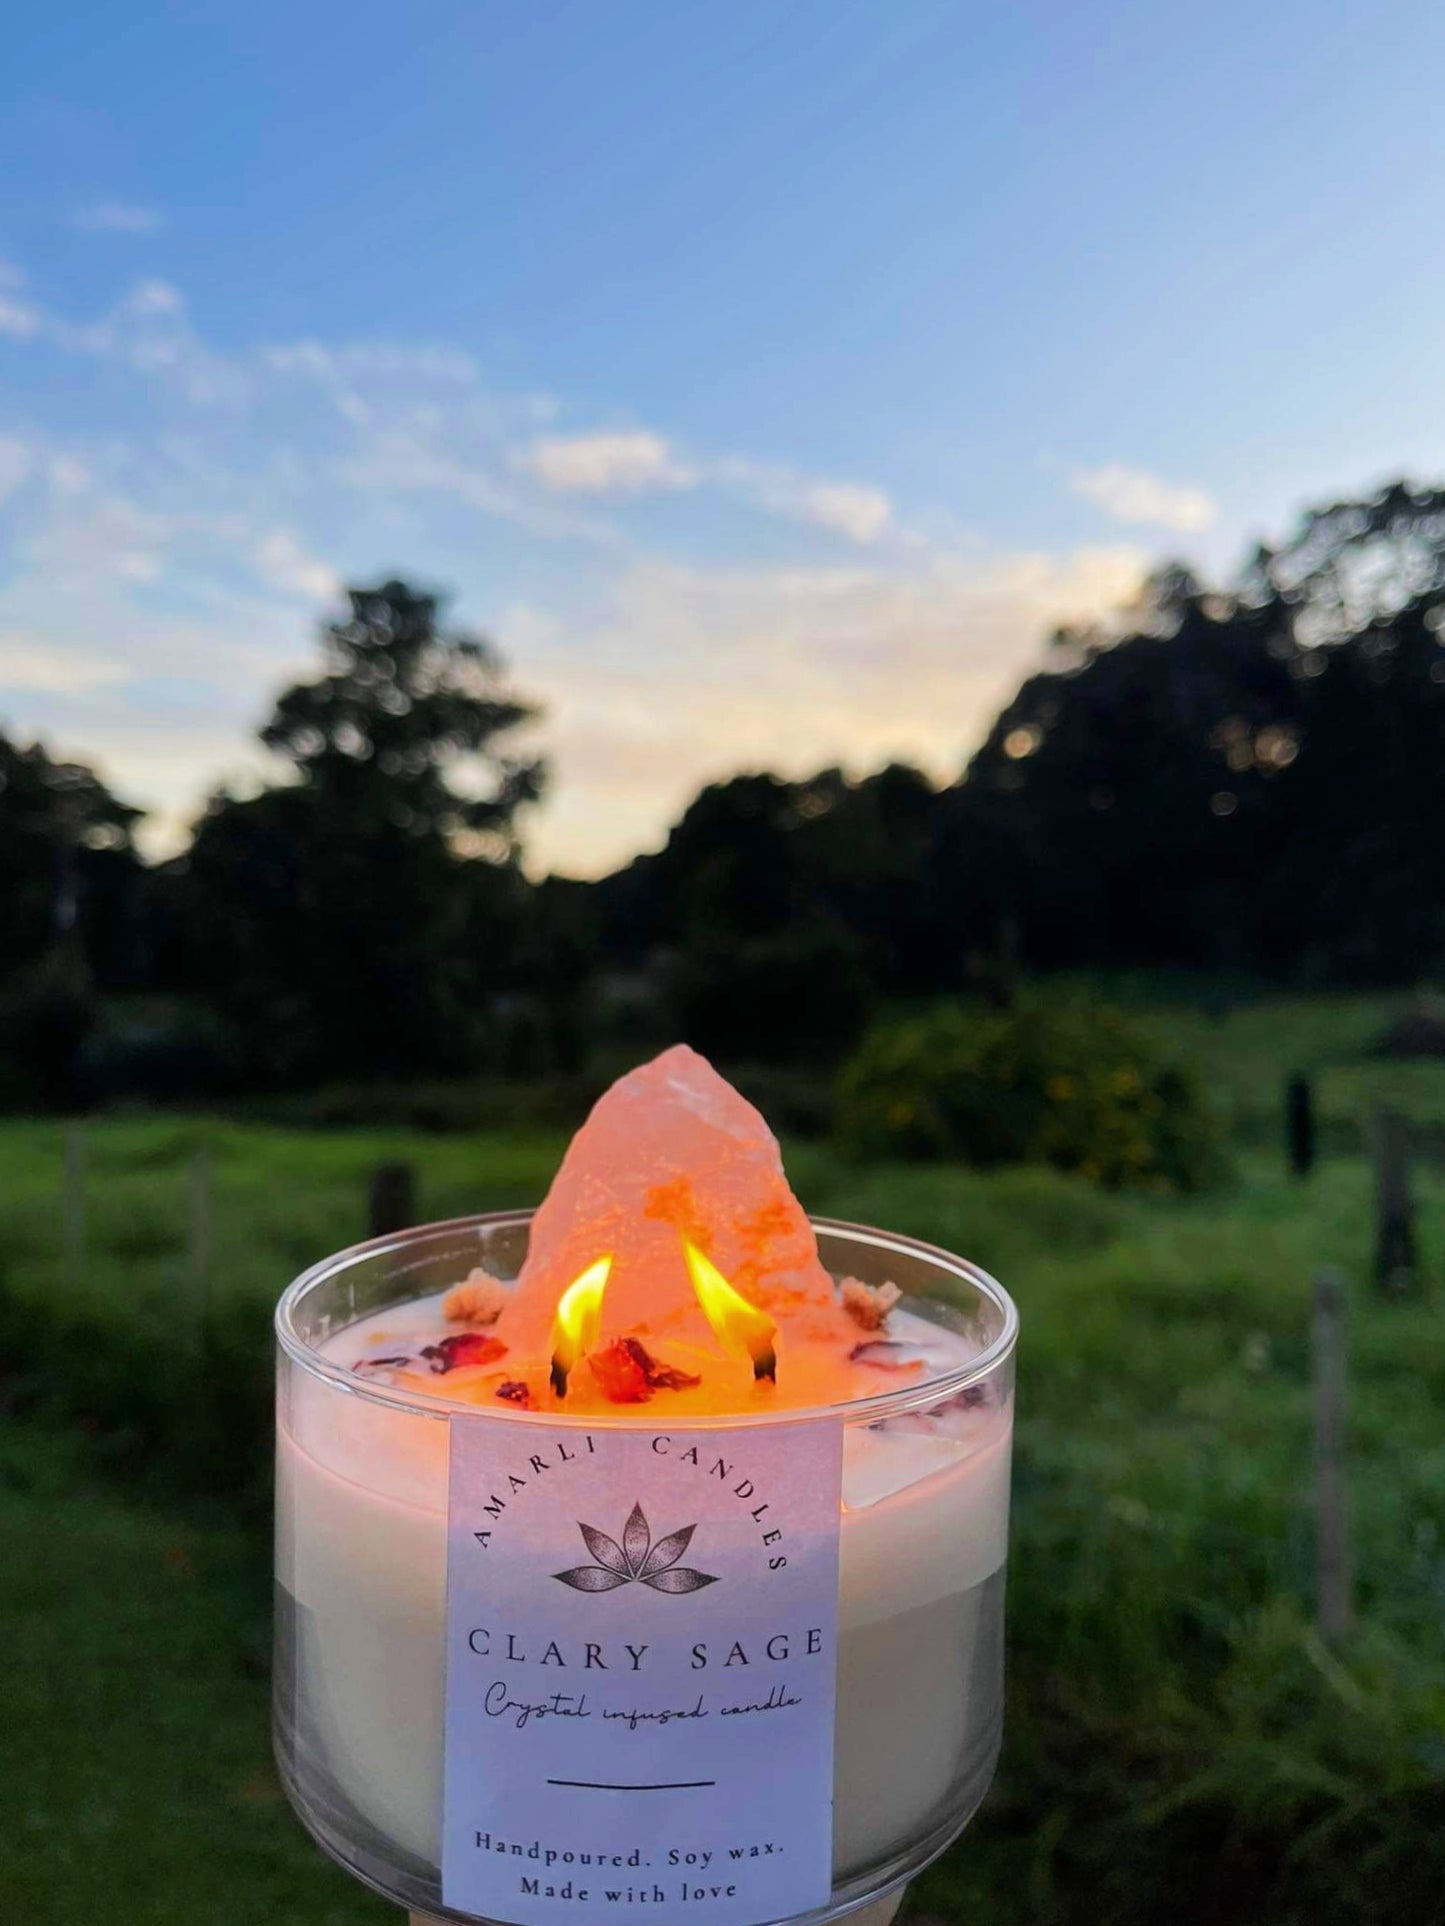 Crystal candle